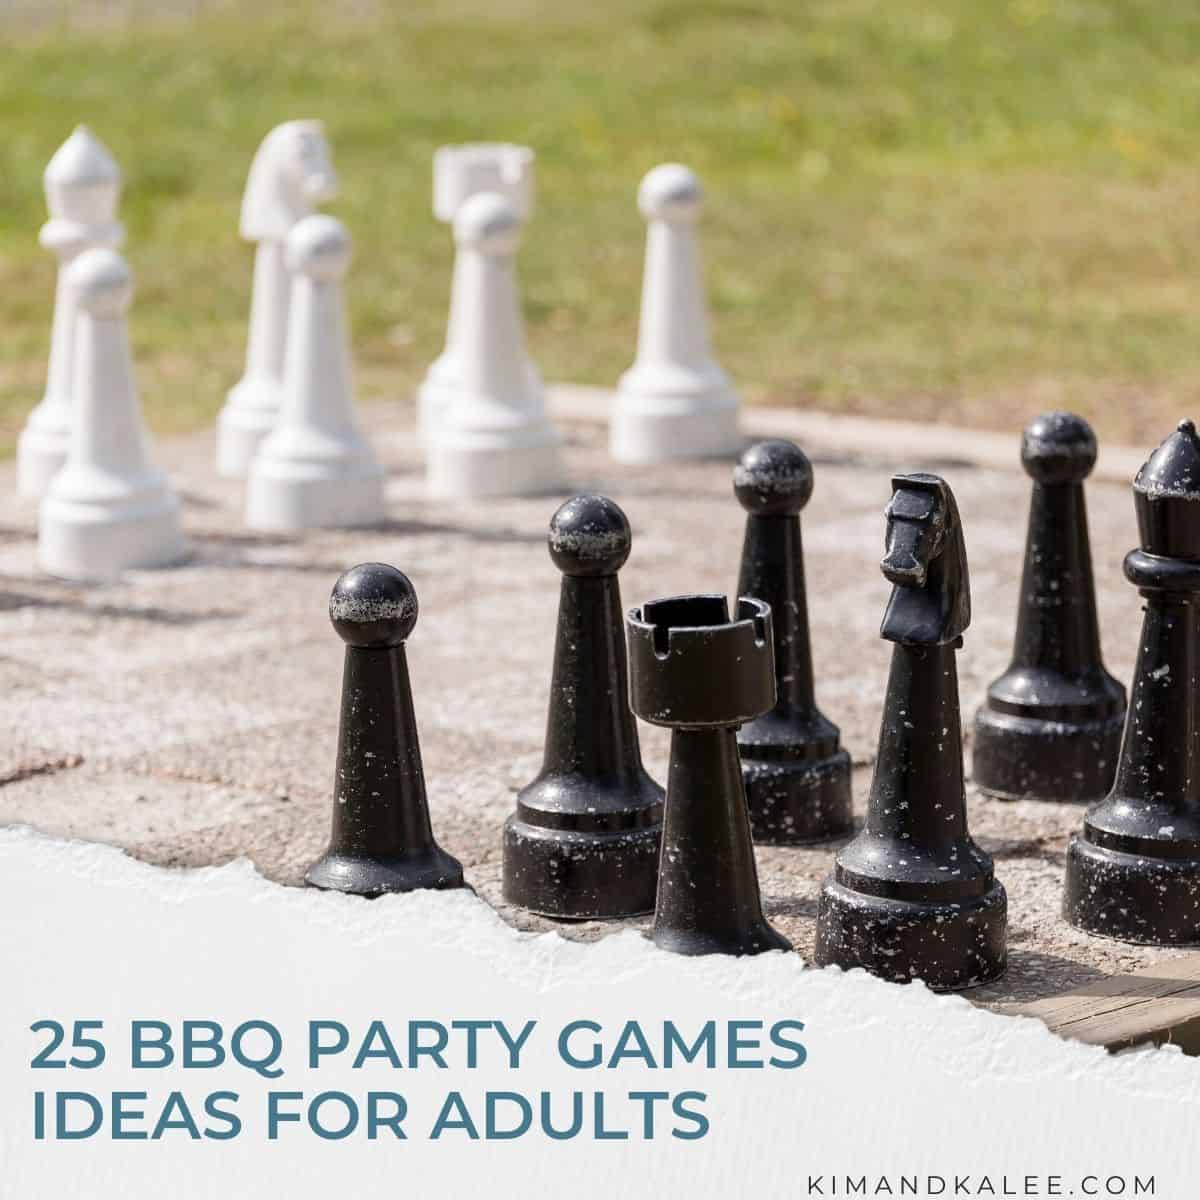 pic of lawn chess with the text overlay in the bottom left "BBQ Party Games Ideas for Adults"